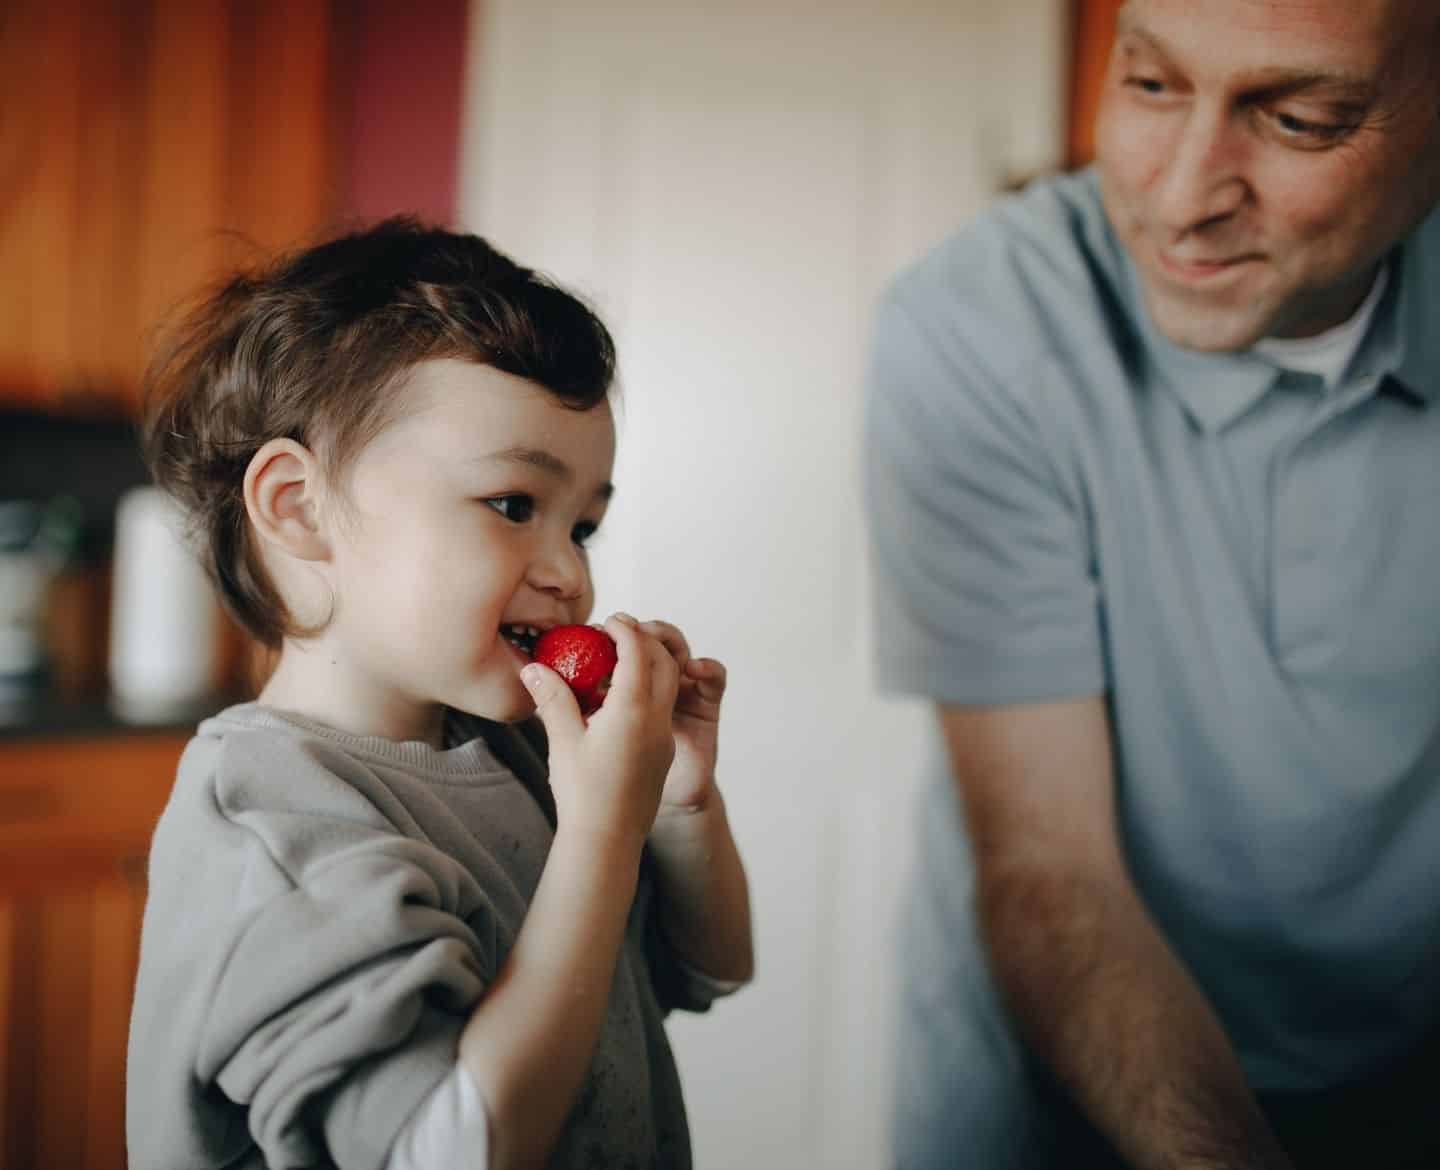 toddler eating strawberry at home with father - healthy food for picky eaters